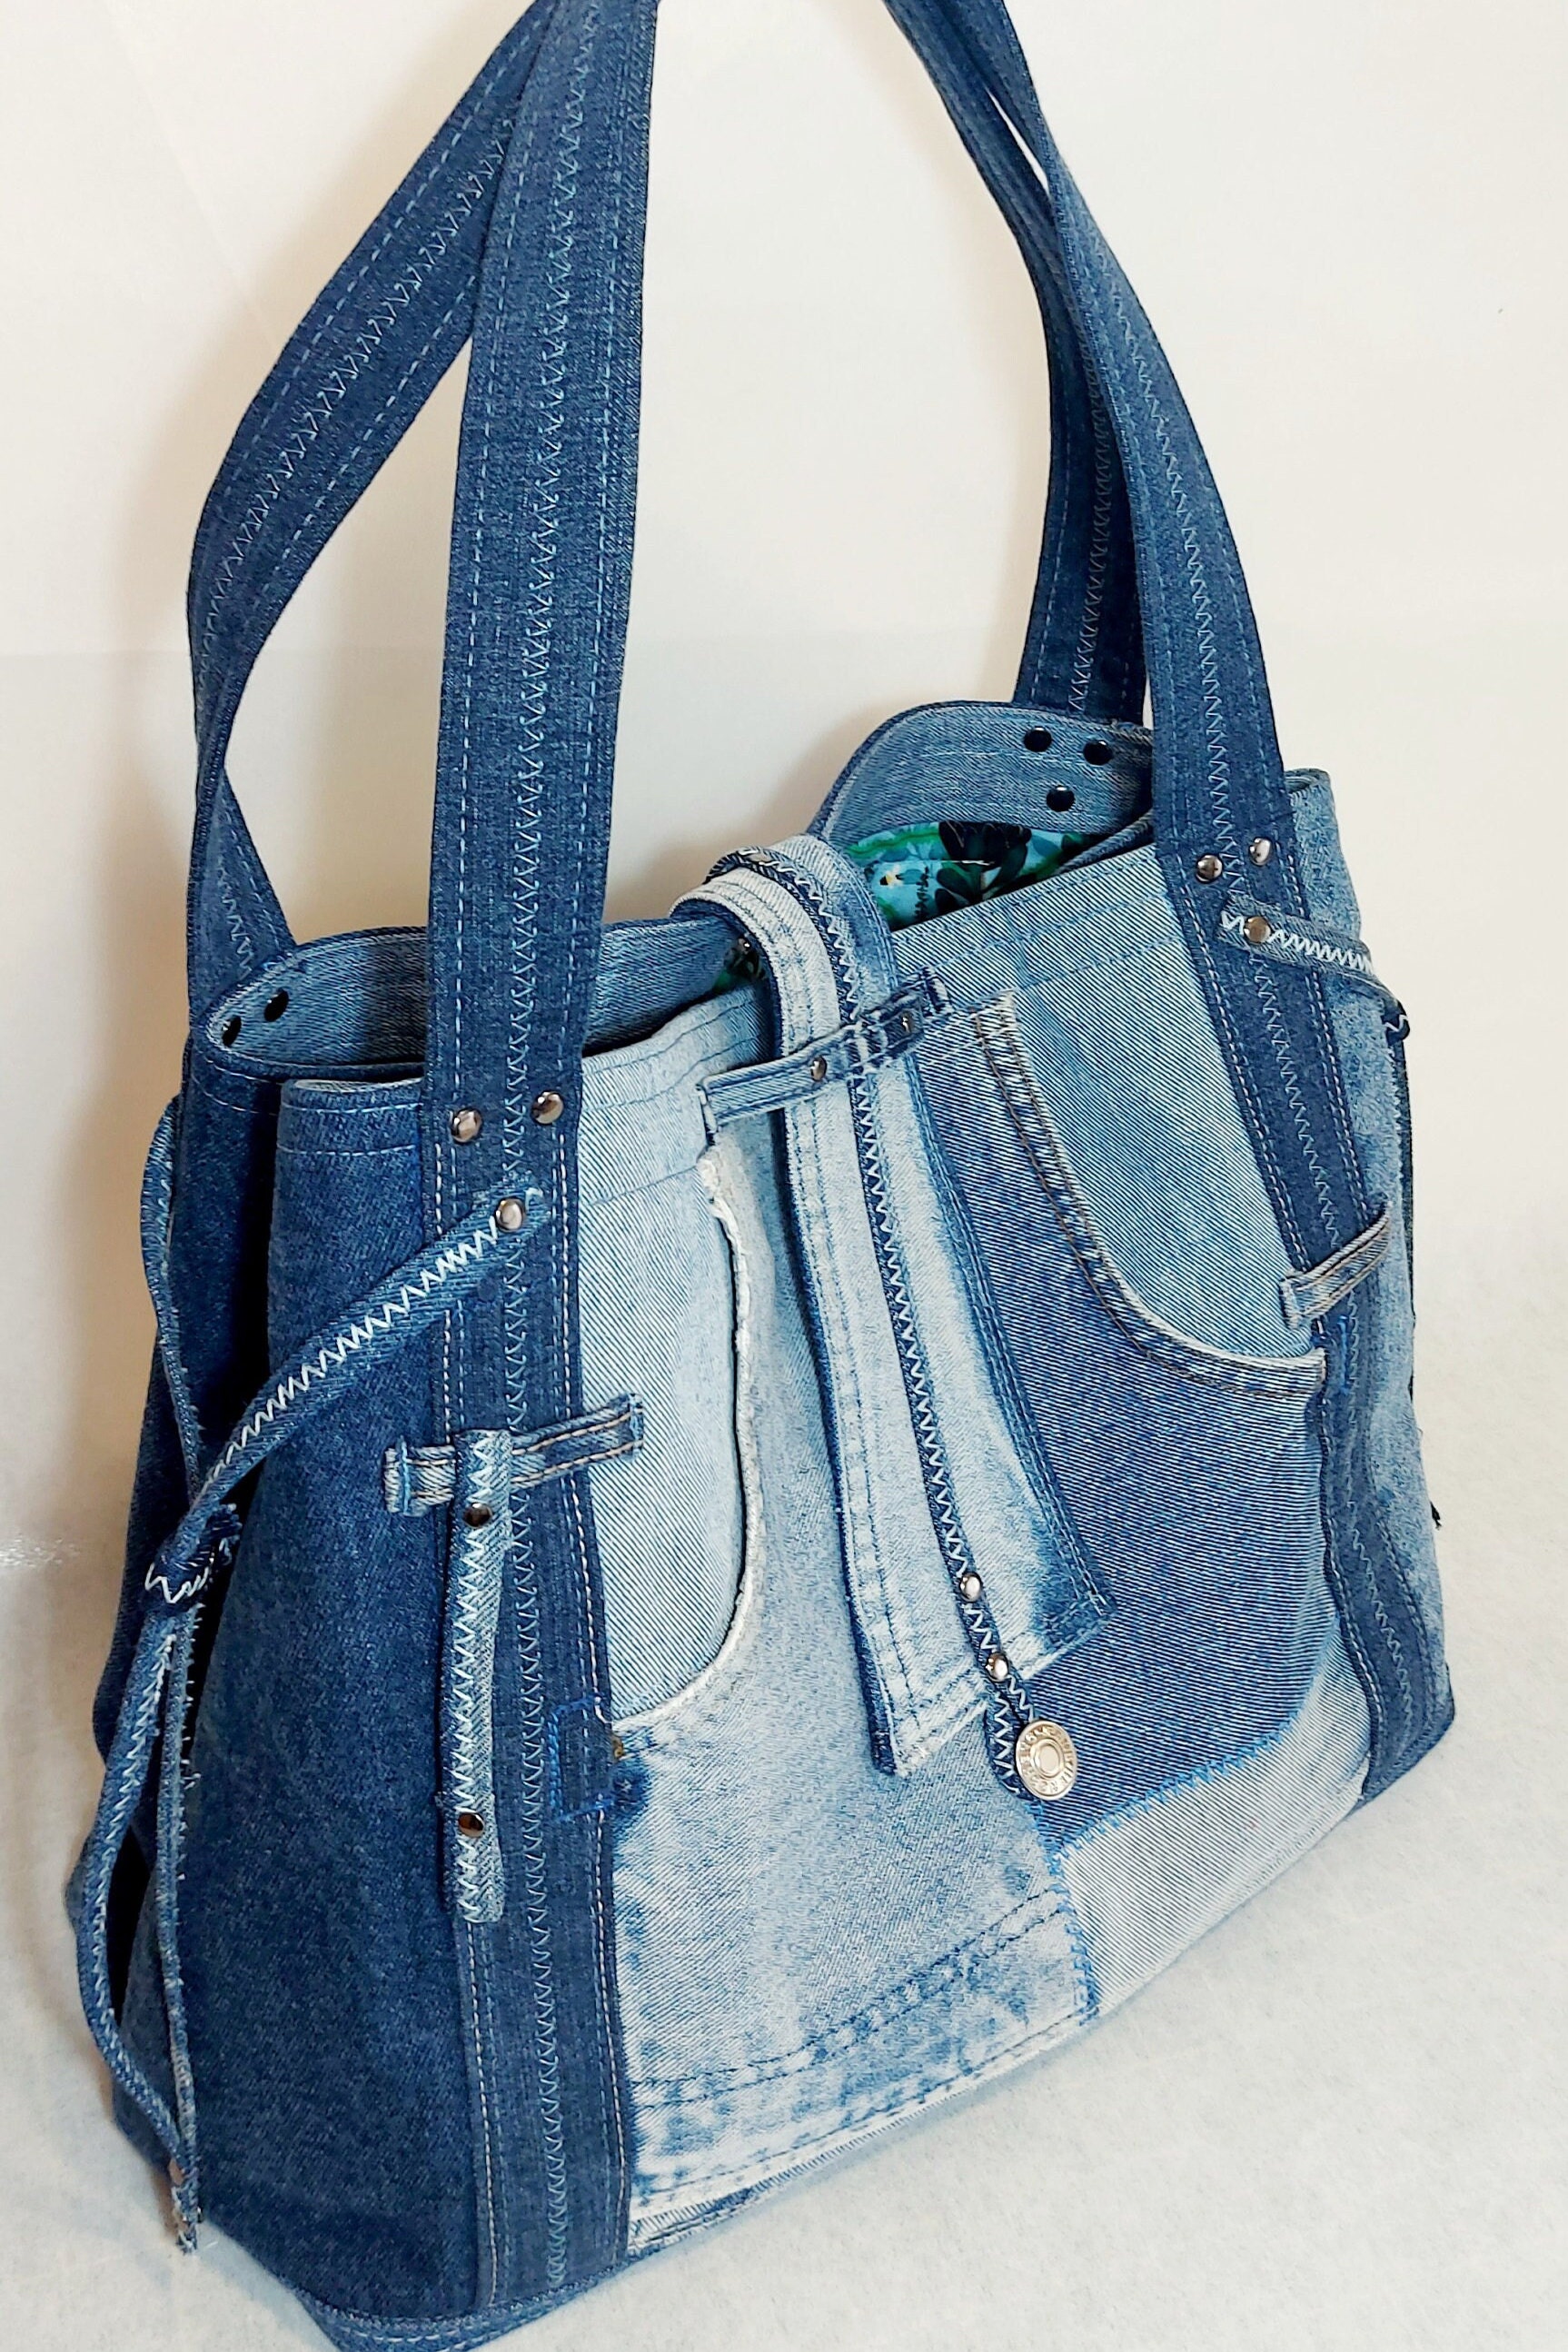 Hand Crafted Large Denim Tote Bag Made From Pre-loved Jeans - Etsy